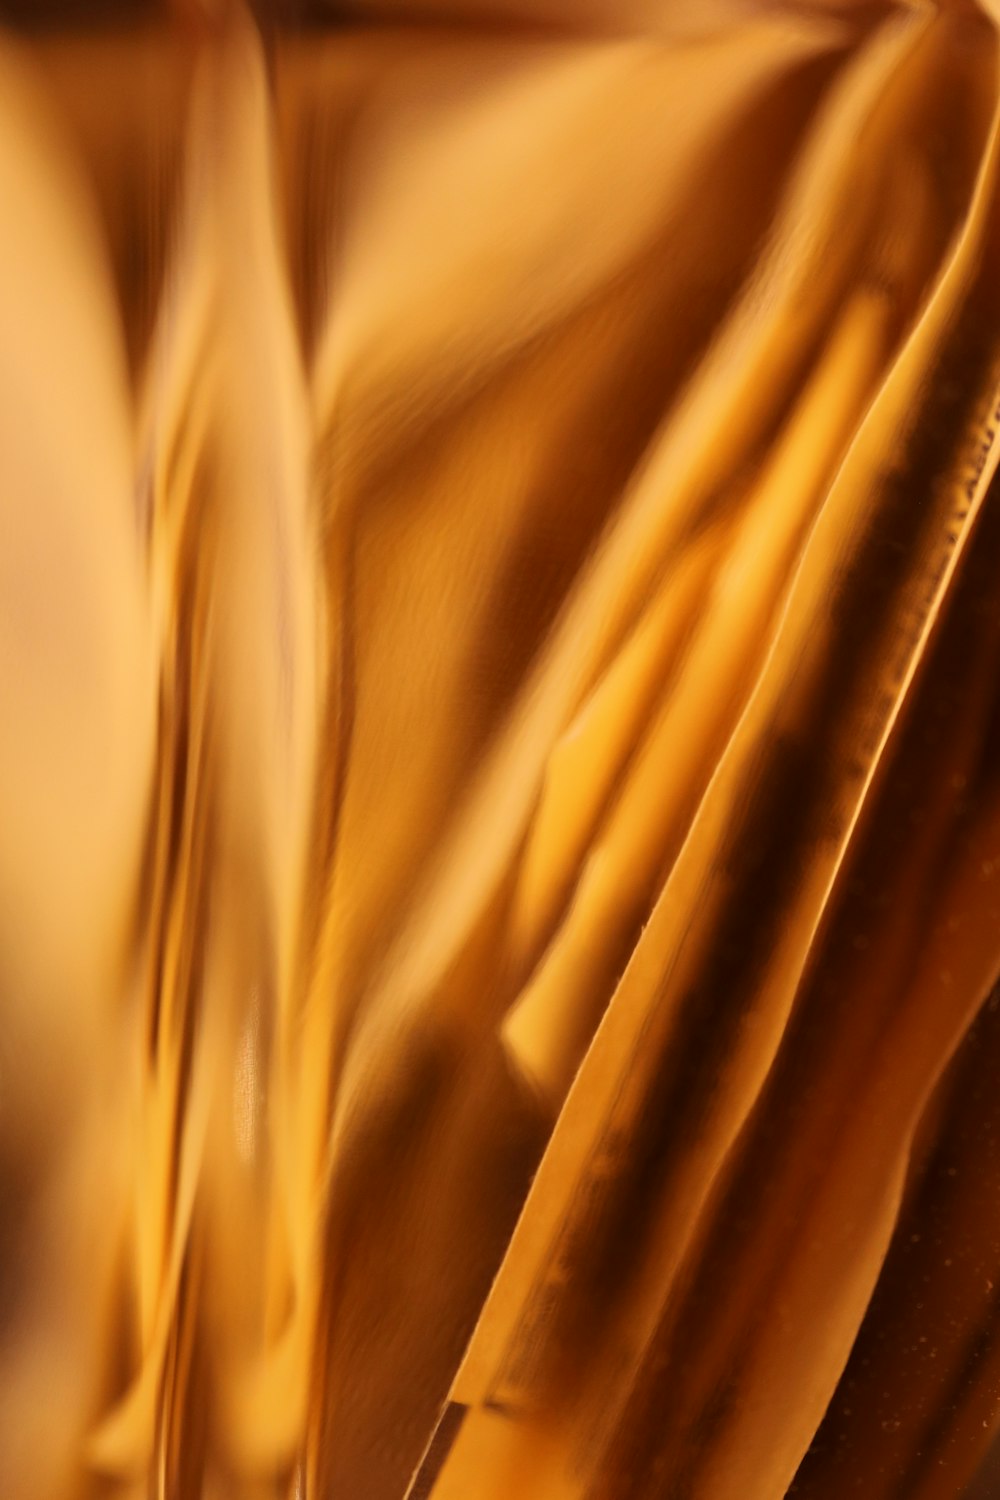 a close up of a banana peel with a blurry background